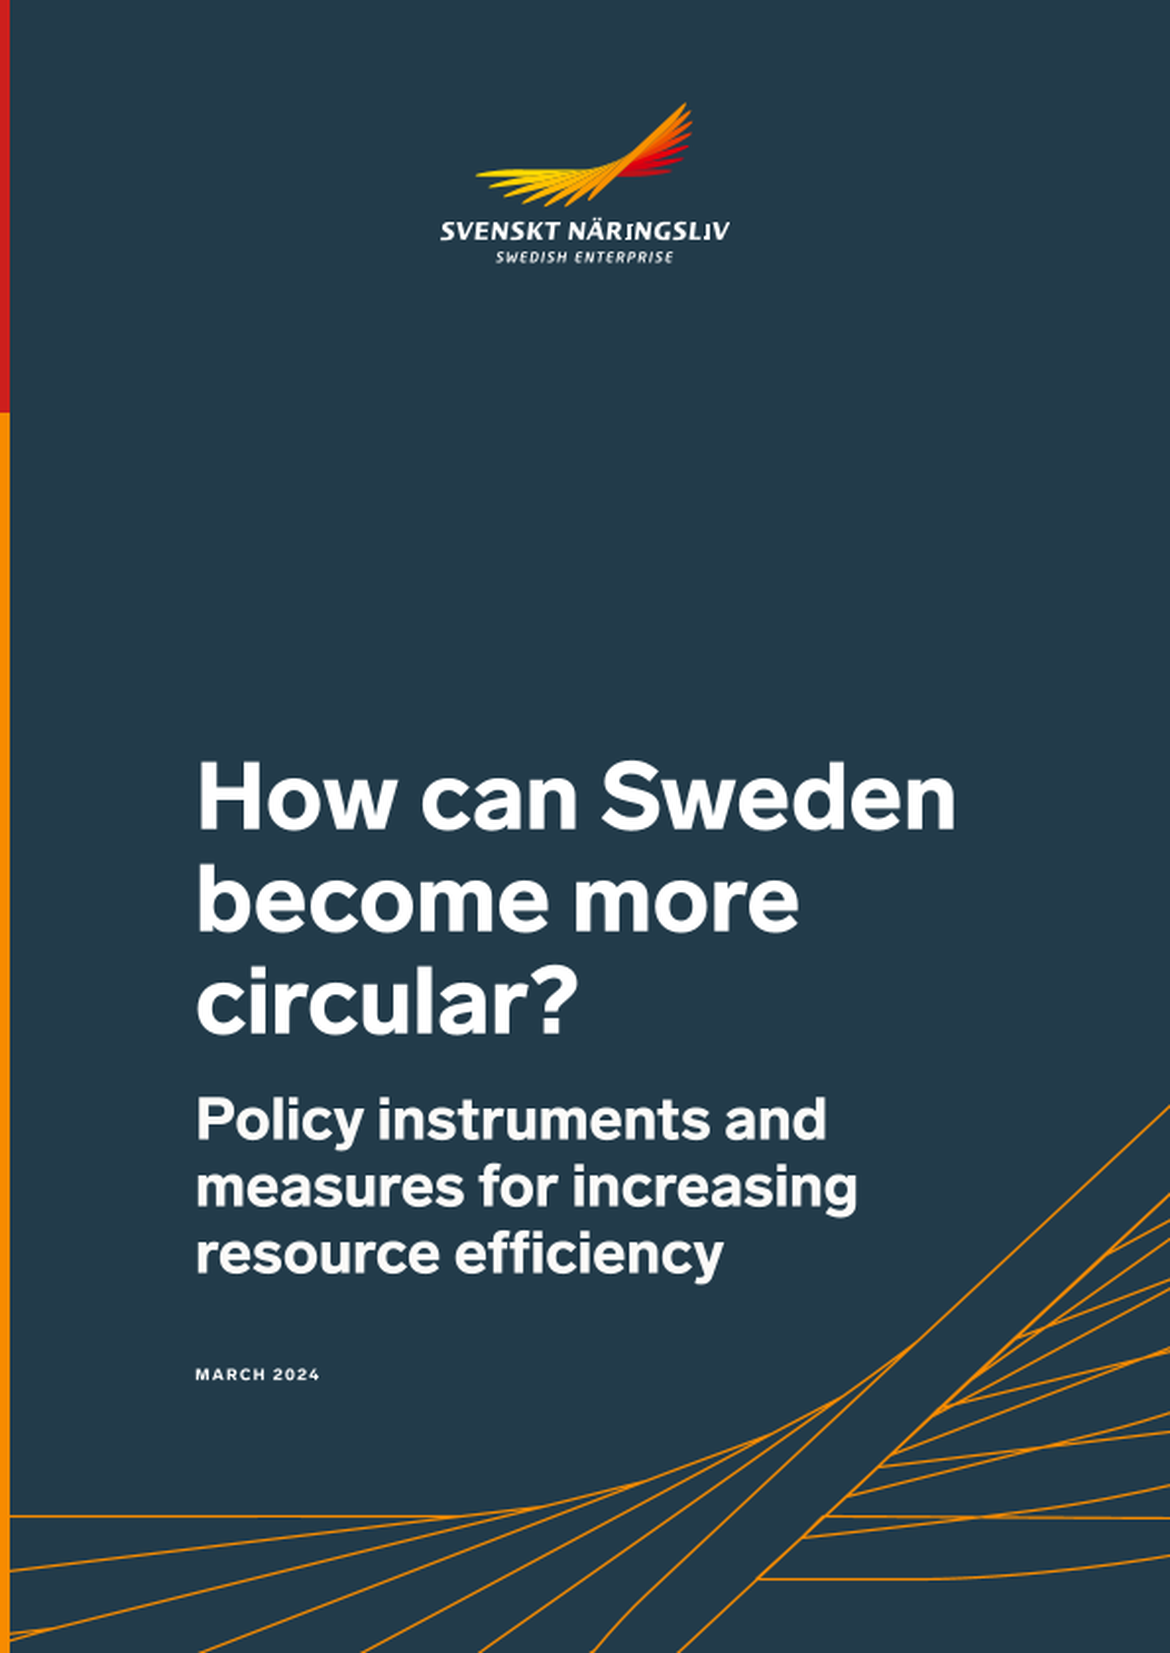 How can Sweden become more circular? Policy instruments and measures for increasing resource efficiency